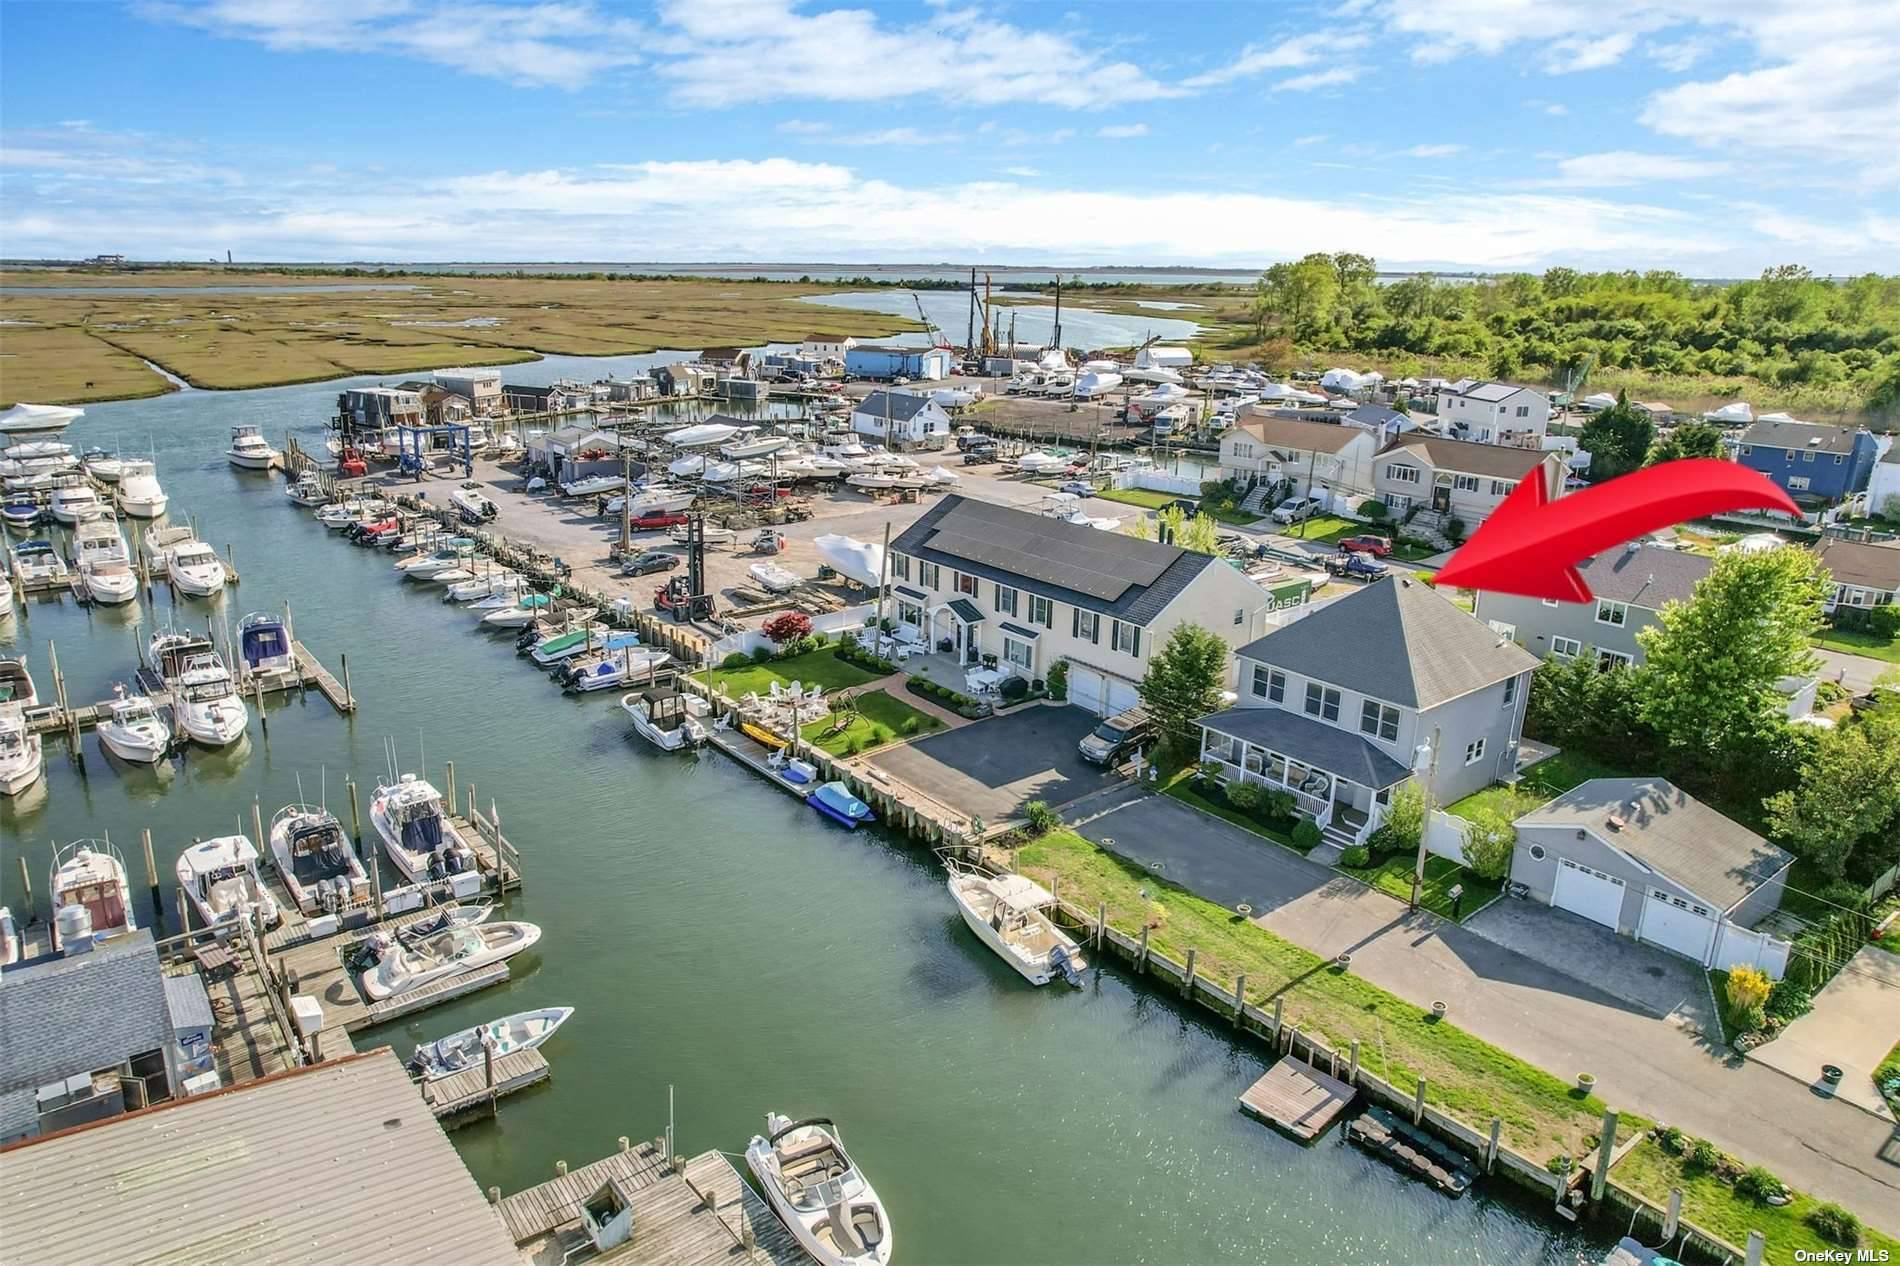 LOW TAXES, 13, 125 with Star discount for waterfront property !